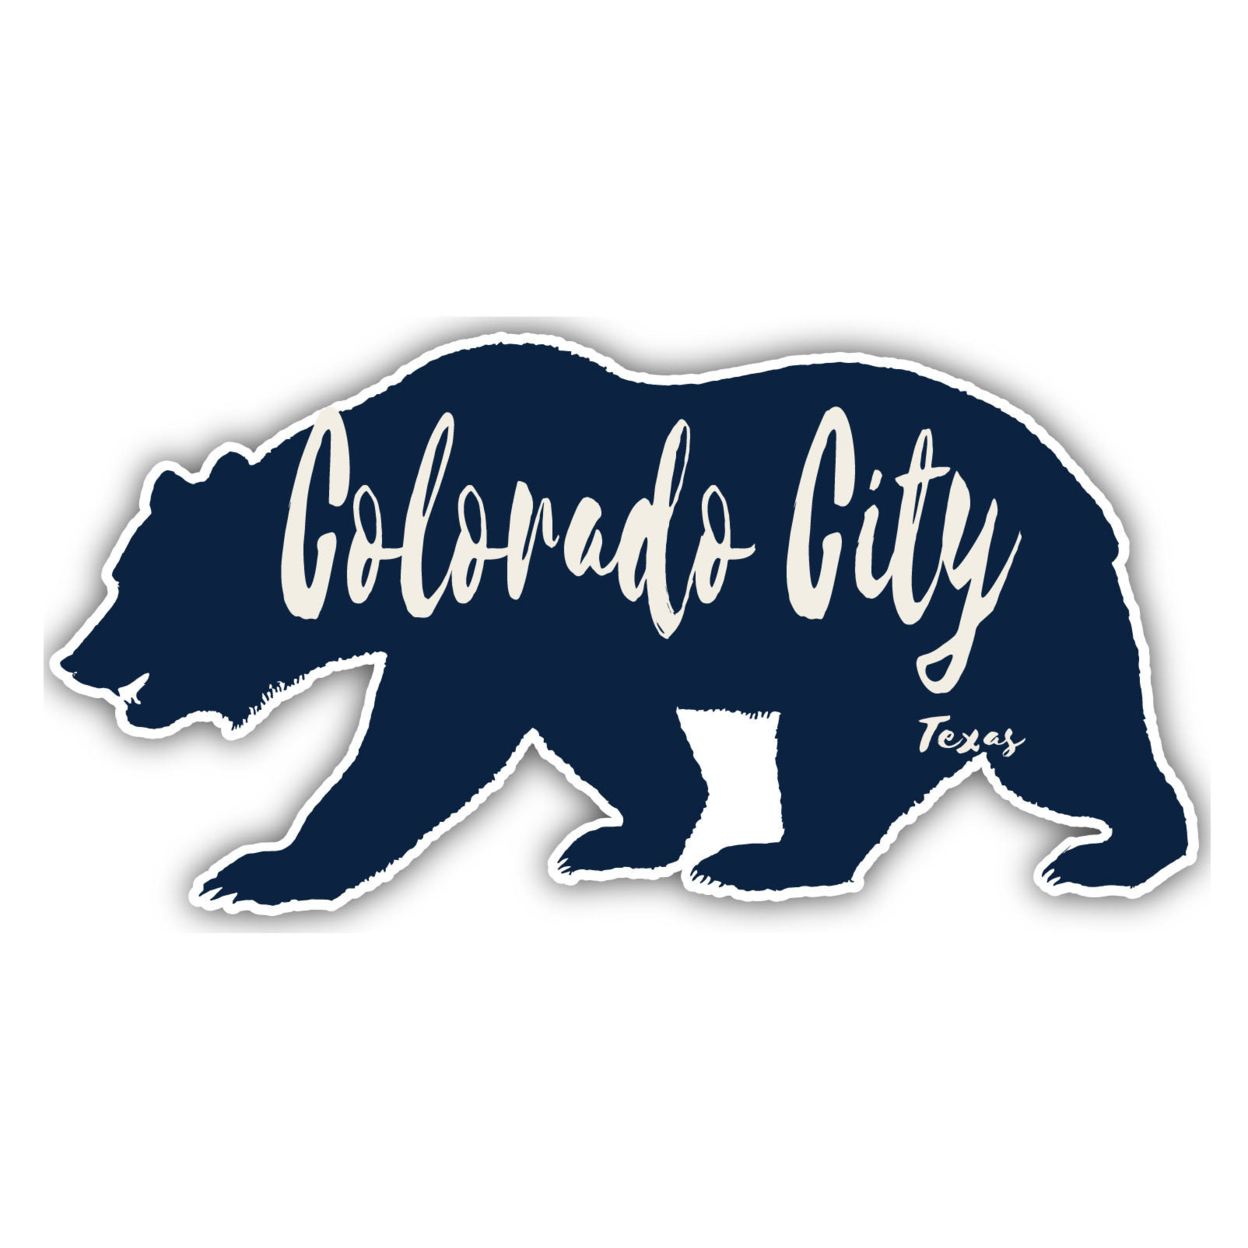 Colorado City Texas Souvenir Decorative Stickers (Choose Theme And Size) - 4-Pack, 2-Inch, Great Outdoors